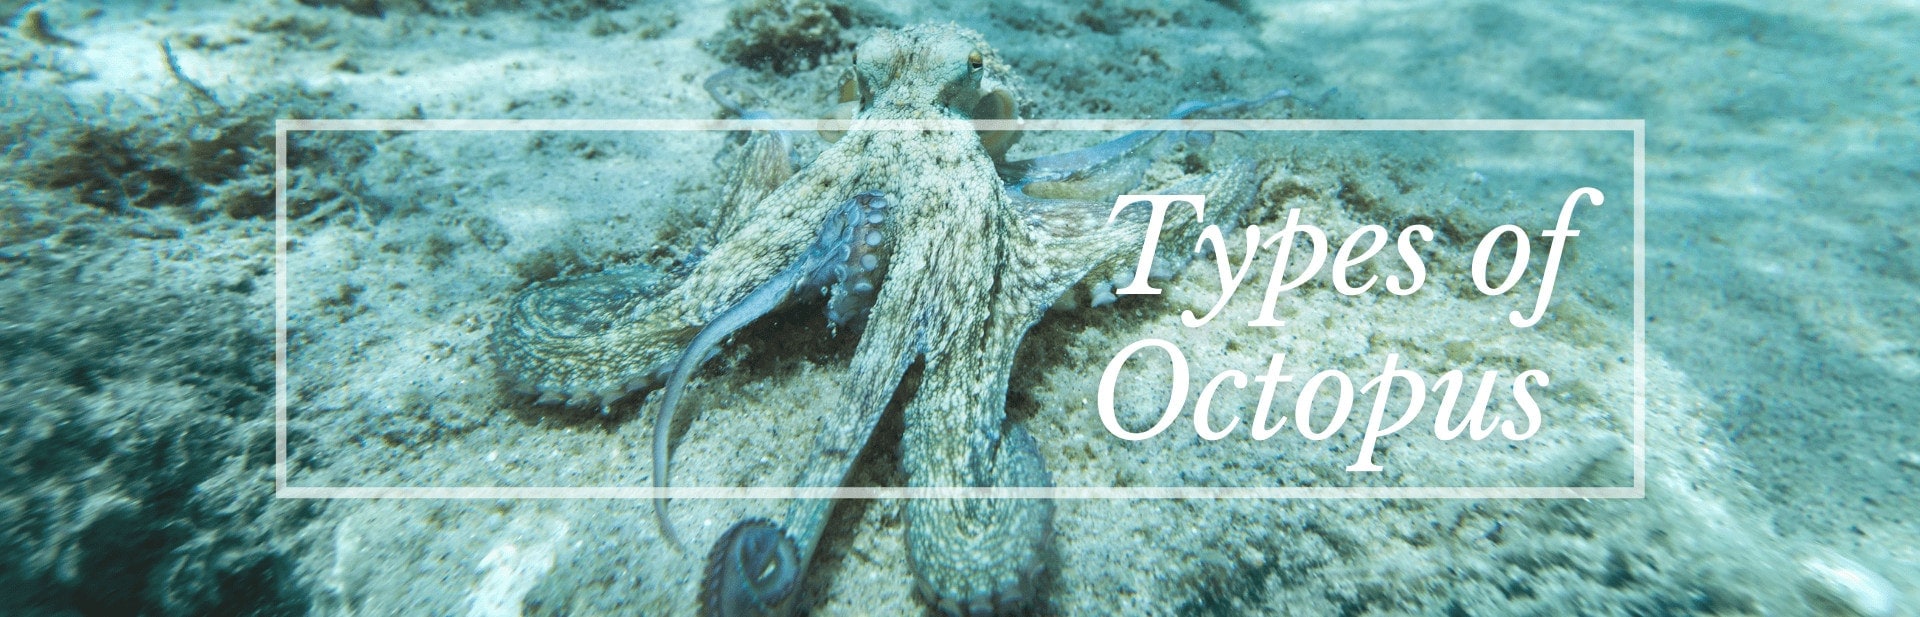 22 Incredible Types of Octopus (Names, Photos & Interesting Facts)